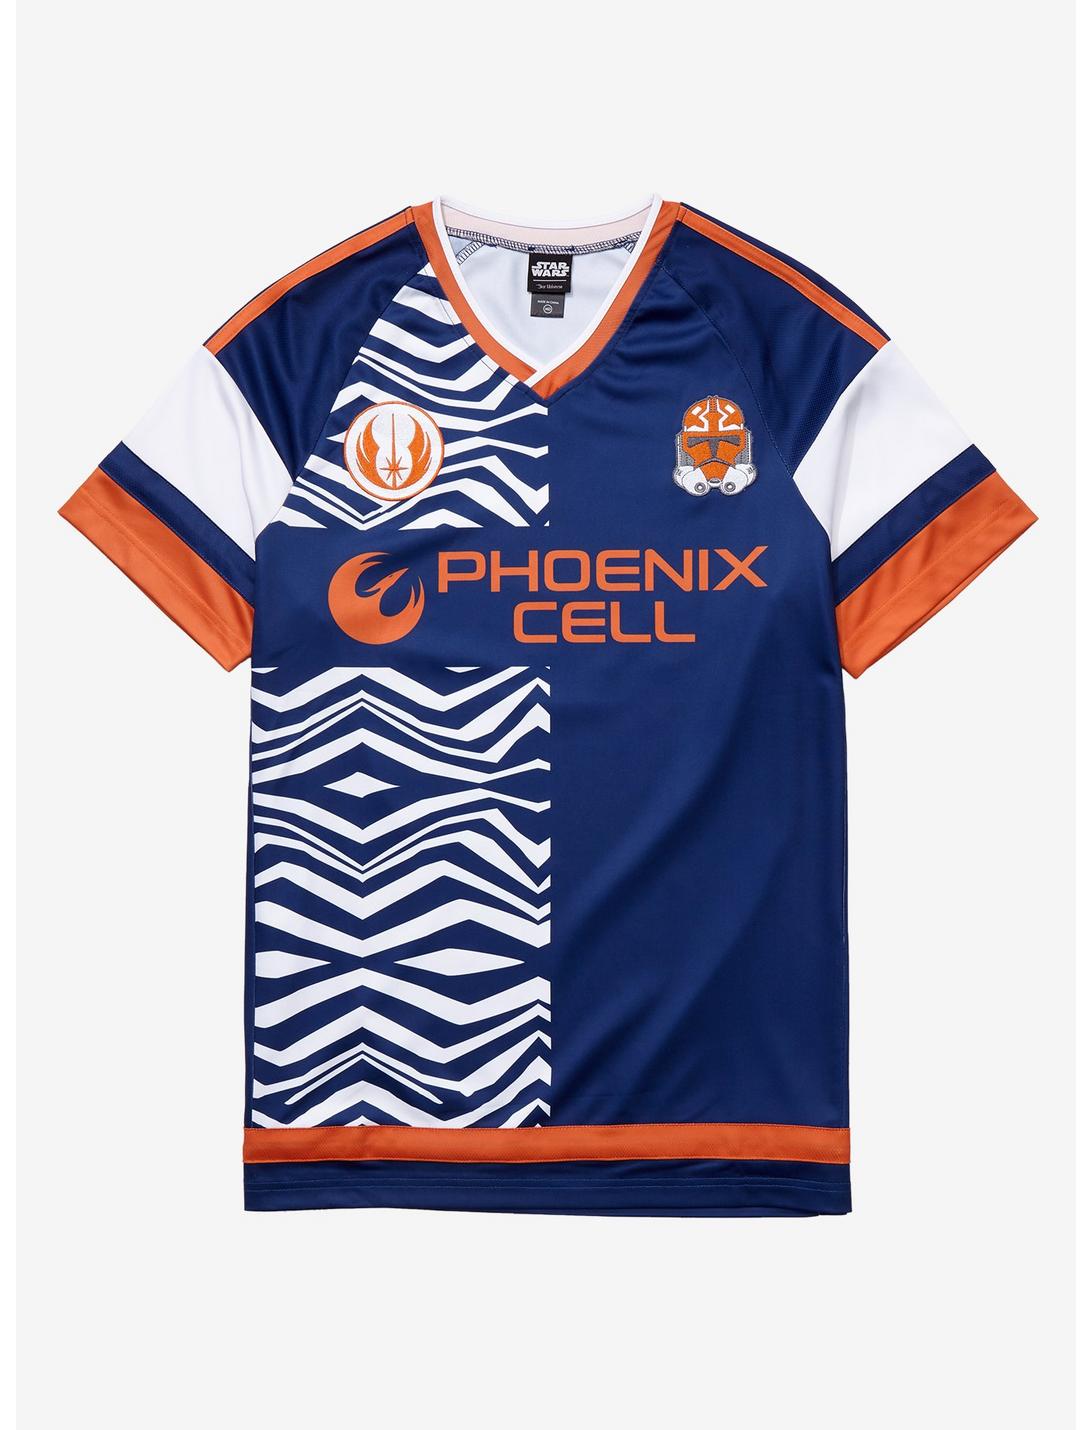 Star Wars: The Clone Wars Ahsoka Tano Phoenix Cell Soccer Jersey - BoxLunch Exclusive, MULTI, hi-res